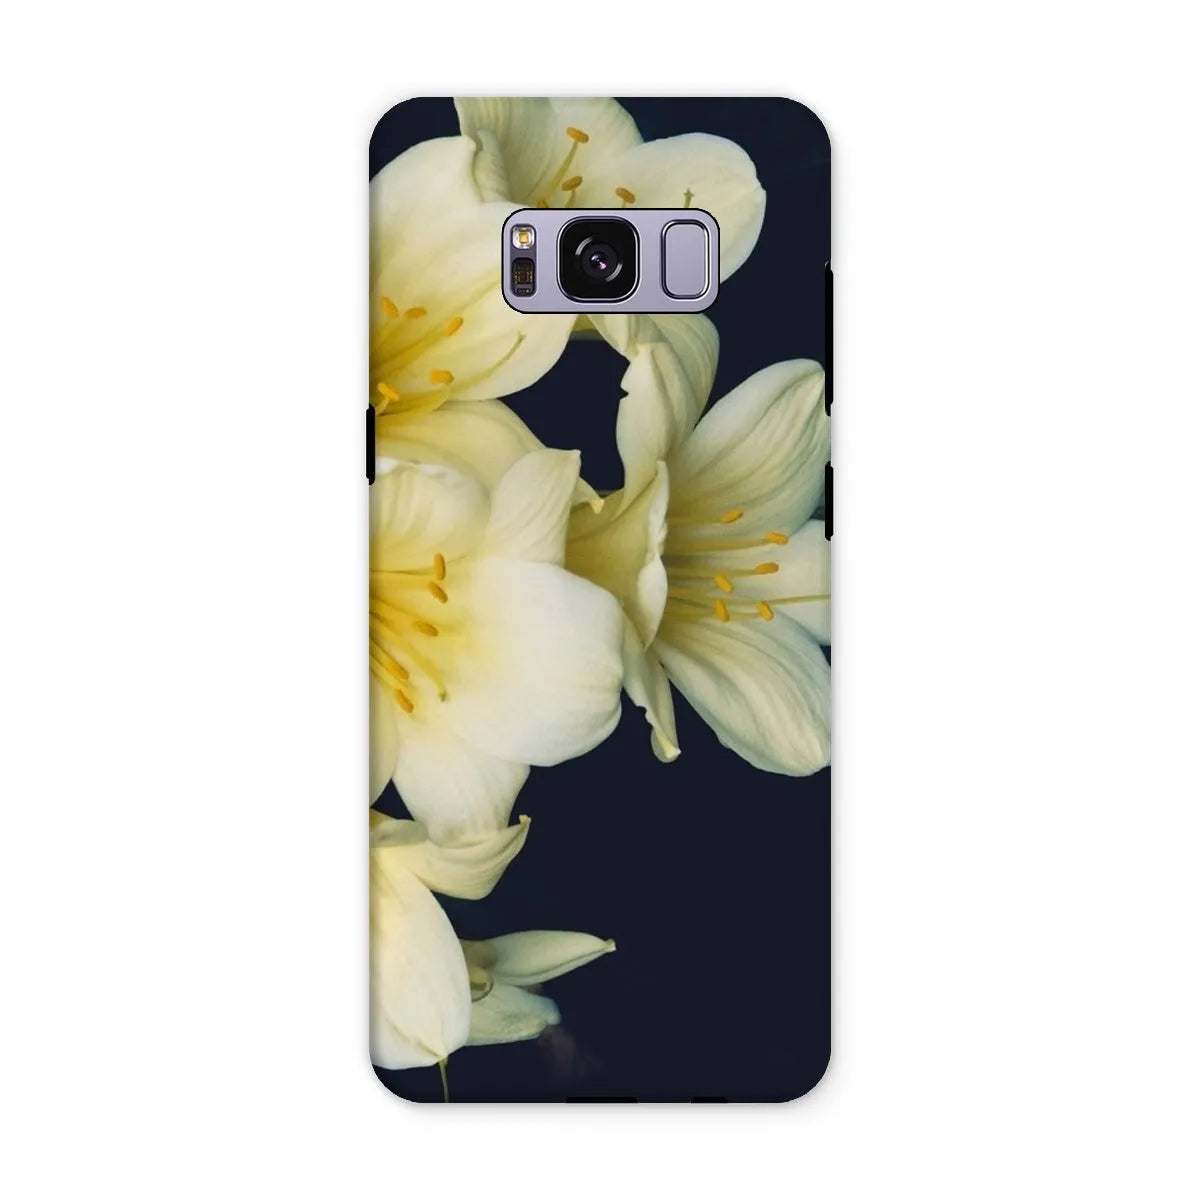 Flower Power Too Tough Phone Case - Samsung Galaxy S8 Plus / Matte - Mobile Phone Cases - Aesthetic Art